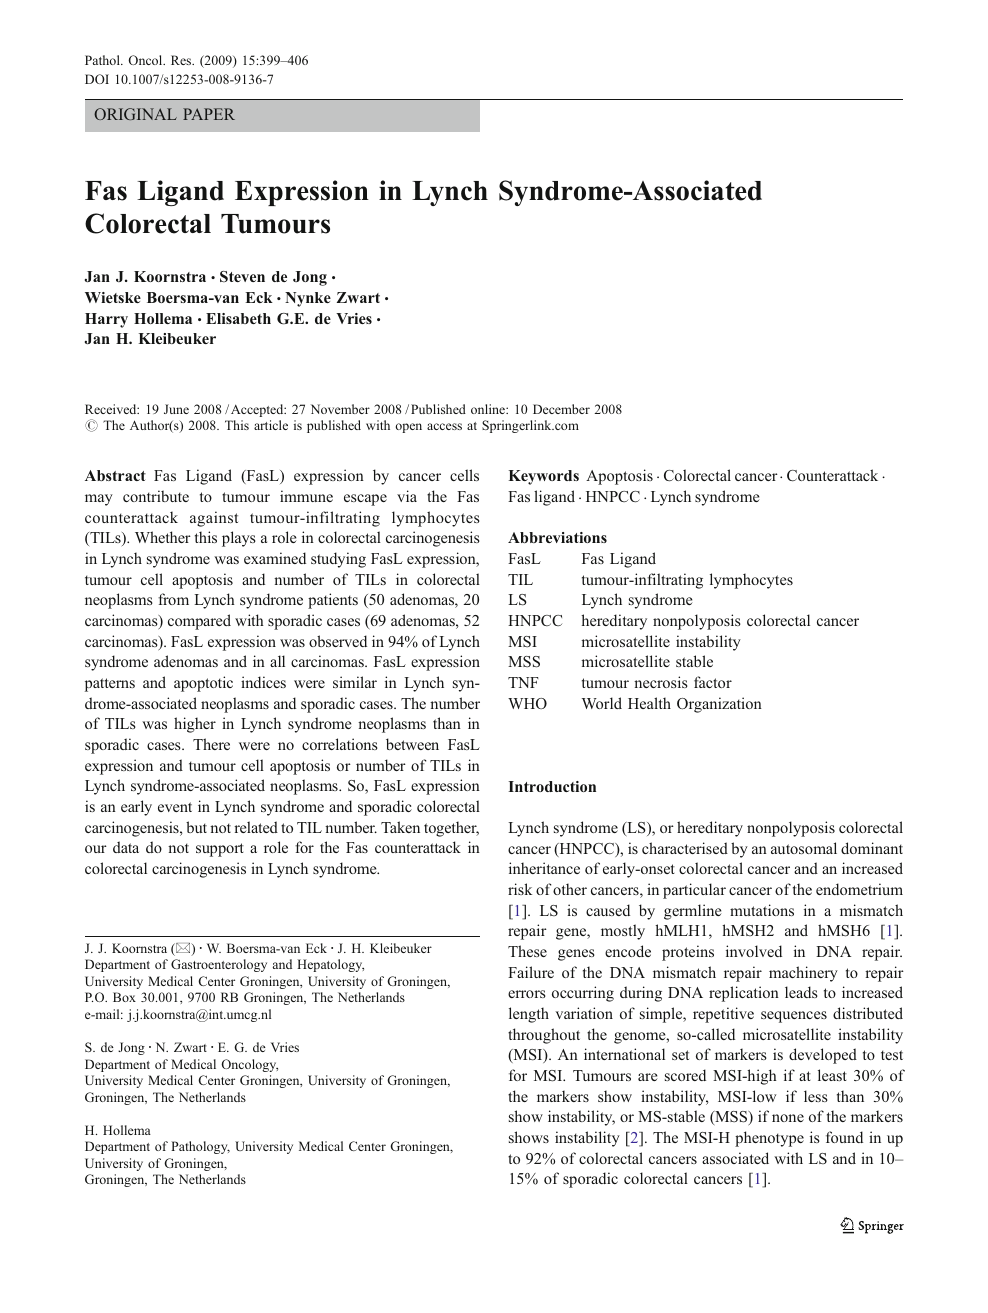 Fas Ligand Expression In Lynch Syndrome Associated Colorectal Tumours Topic Of Research Paper In Biological Sciences Download Scholarly Article Pdf And Read For Free On Cyberleninka Open Science Hub